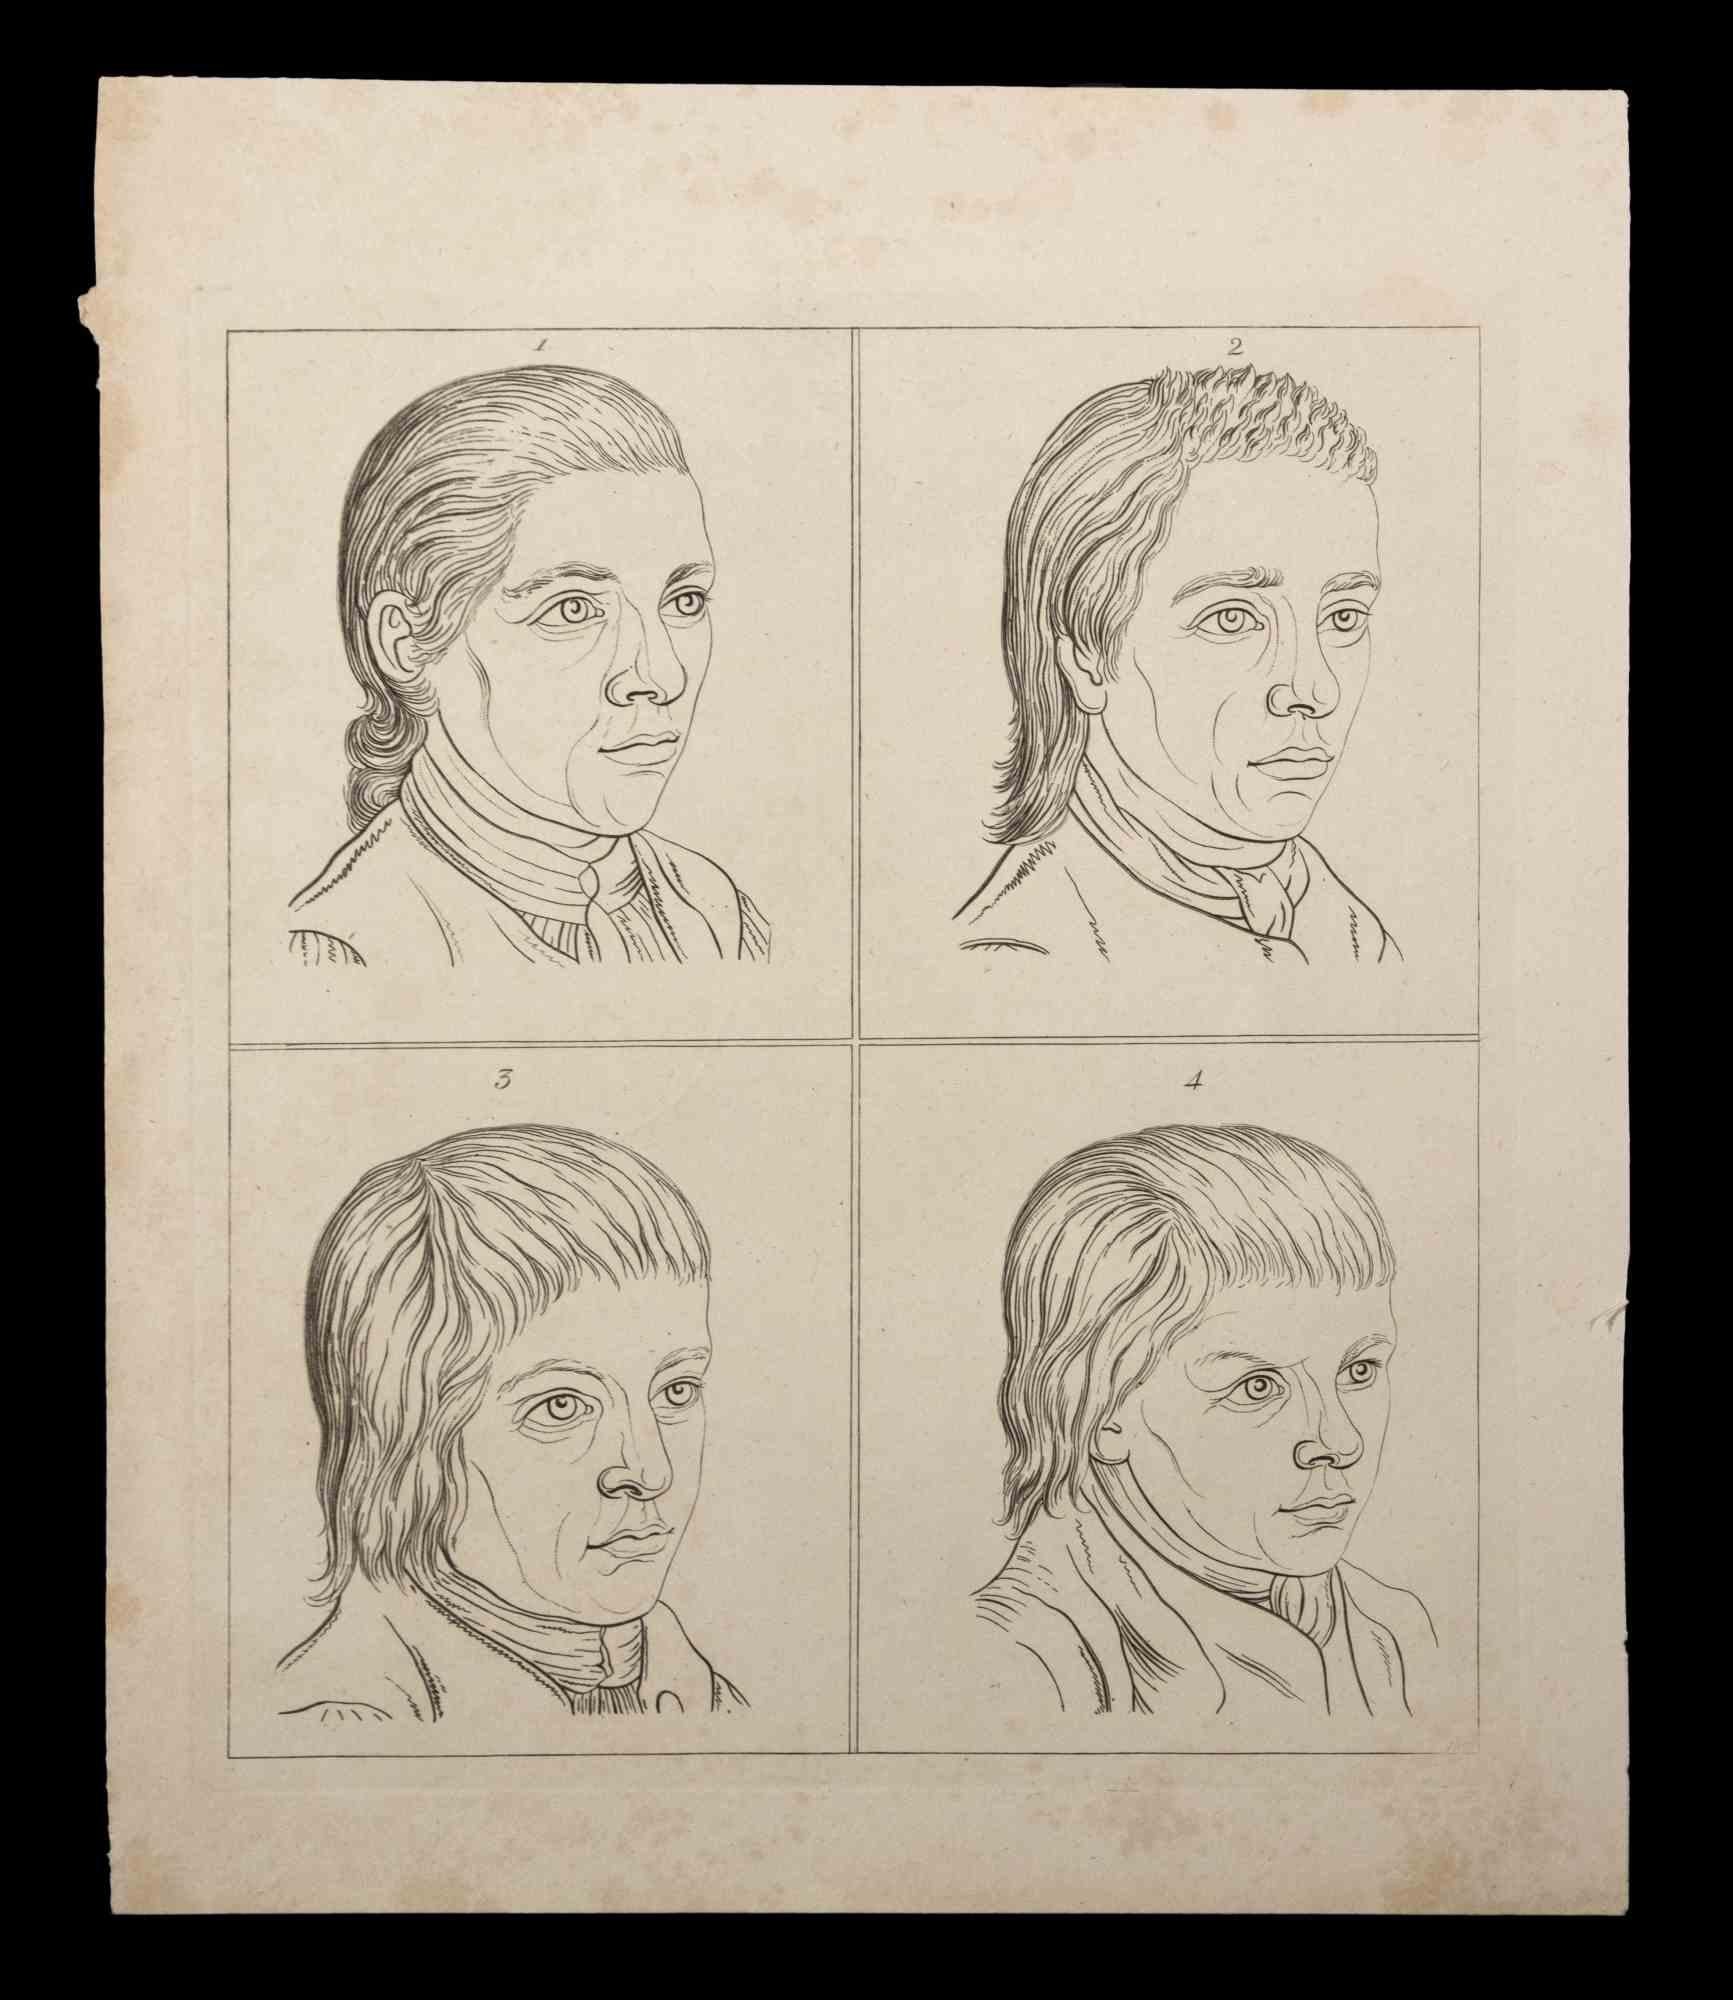 Portrait of men is an original etching artwork realized by Thomas Holloway for Johann Caspar Lavater's "Essays on Physiognomy, Designed to Promote the Knowledge and the Love of Mankind", London, Bensley, 1810. 

This artwork represents the portrait